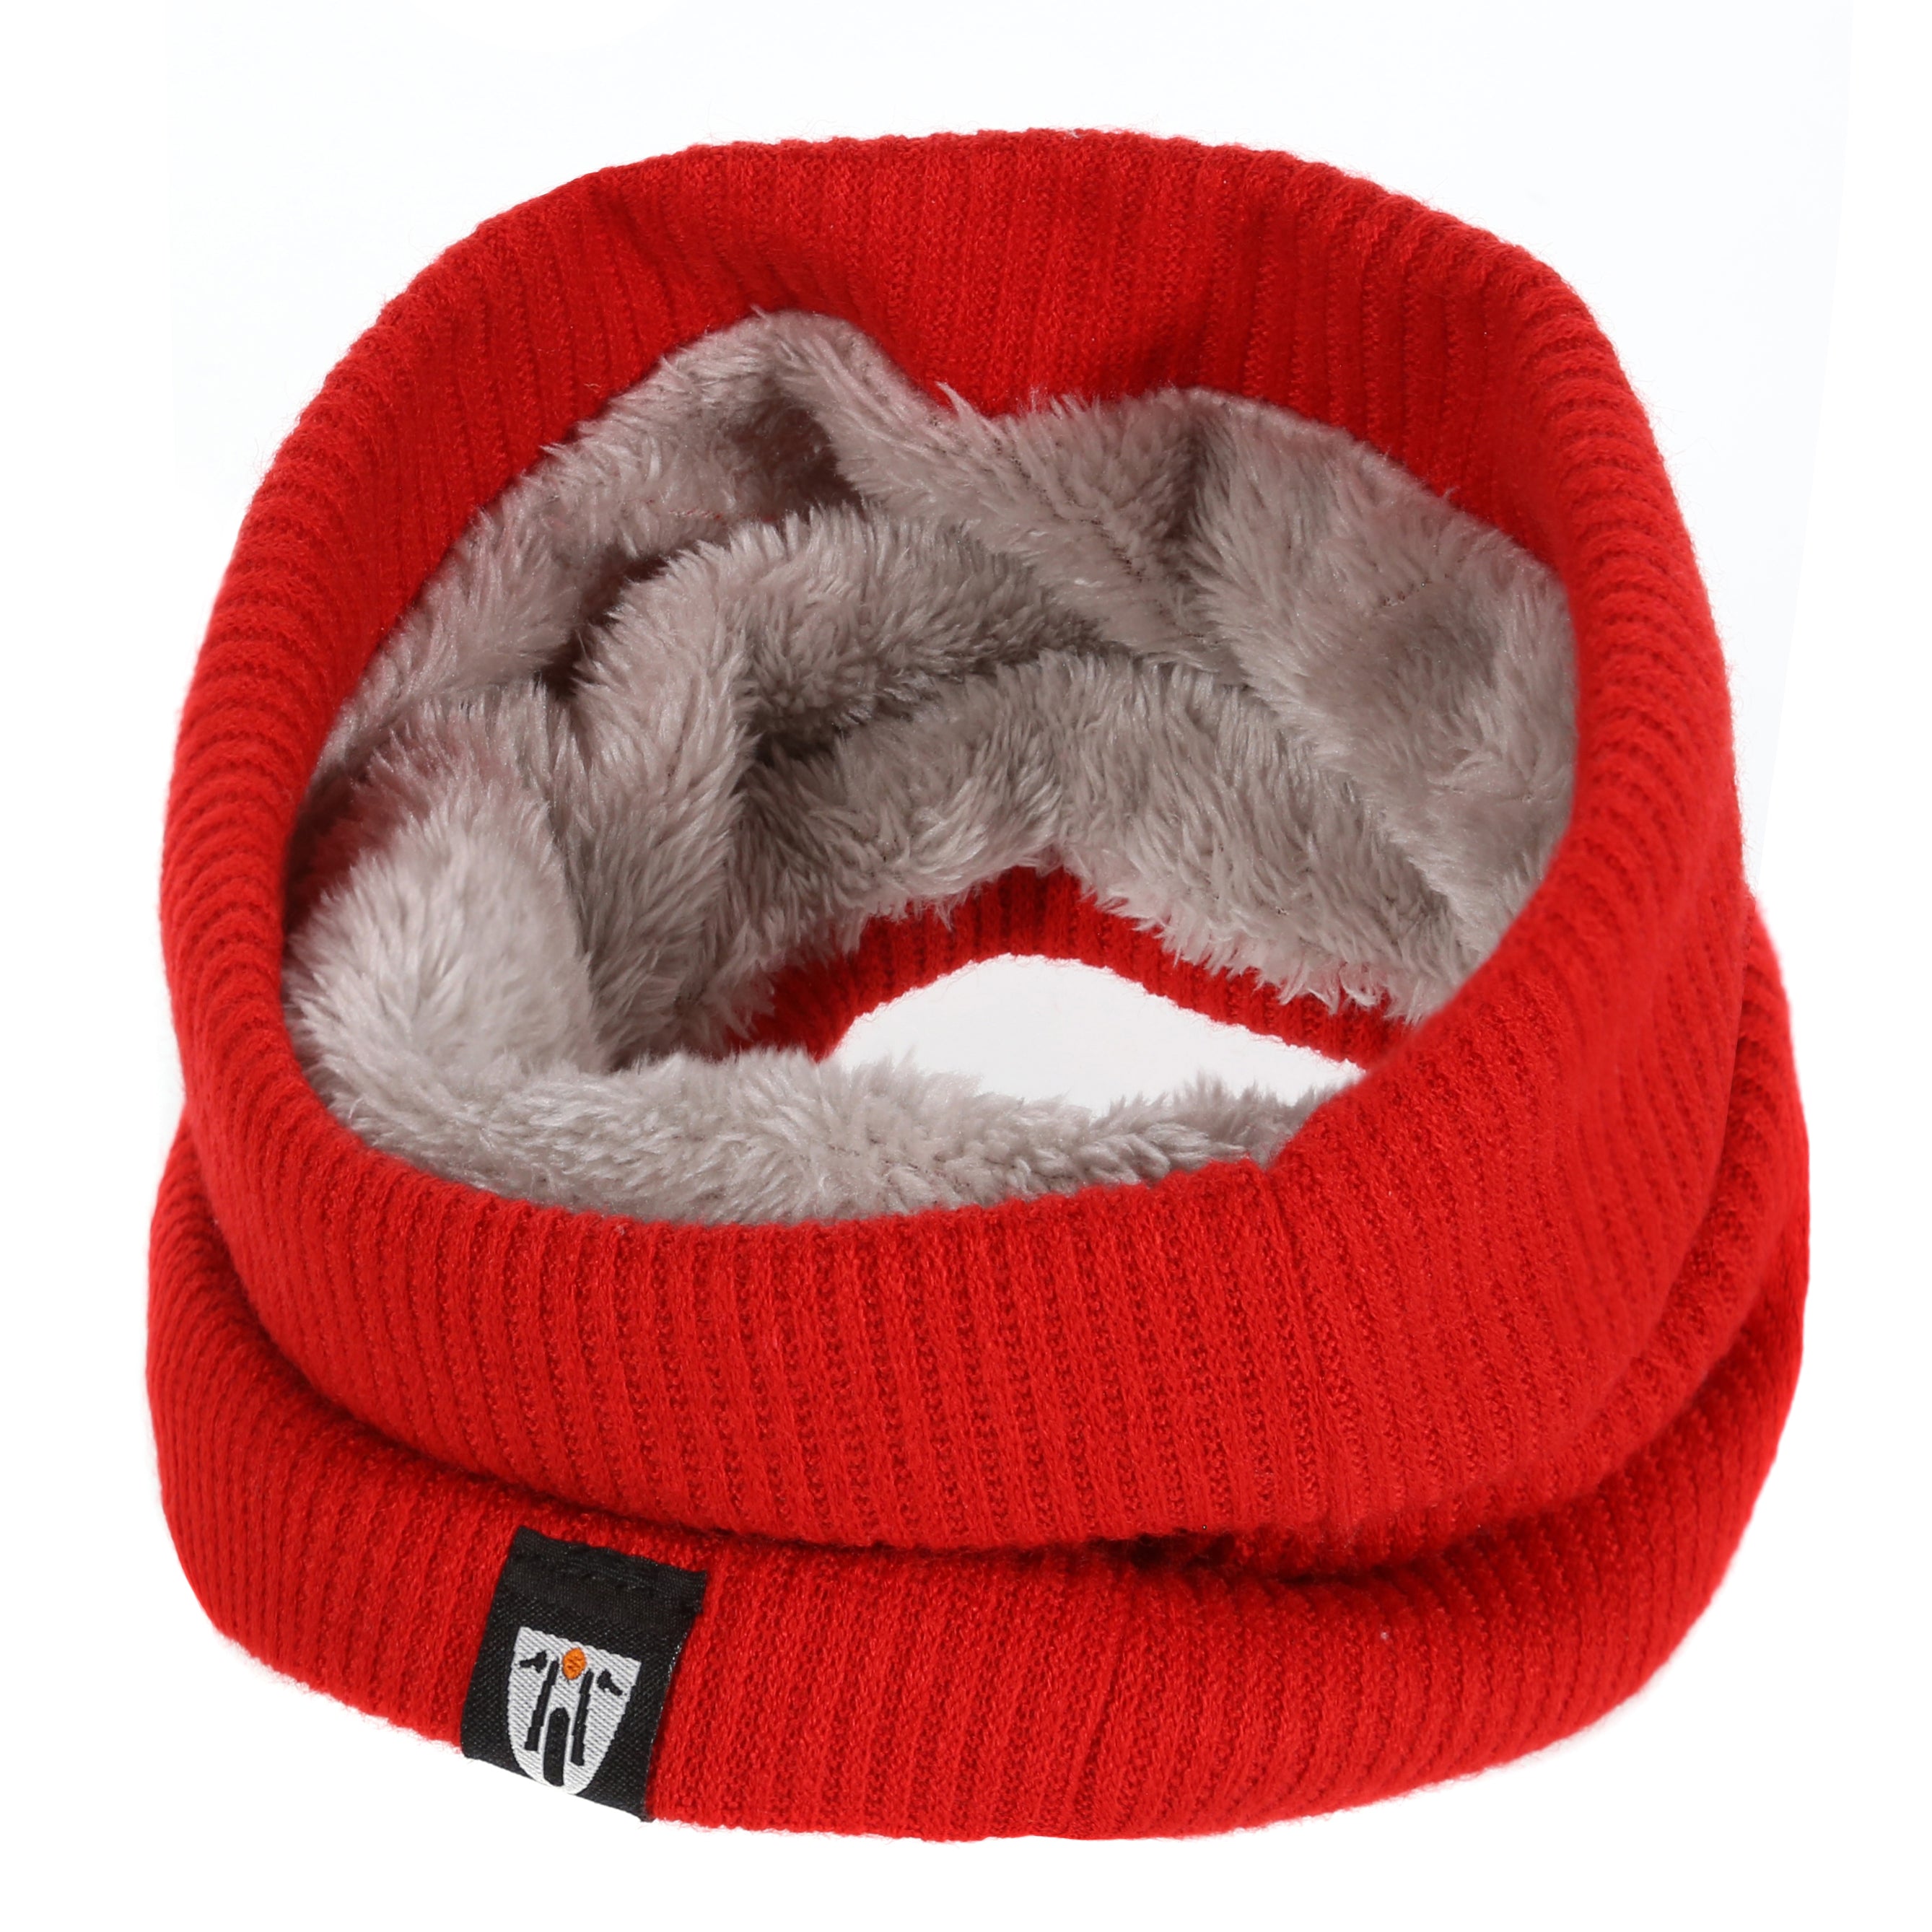 Red and warm motorcycle neck warmer from MotoGirl 